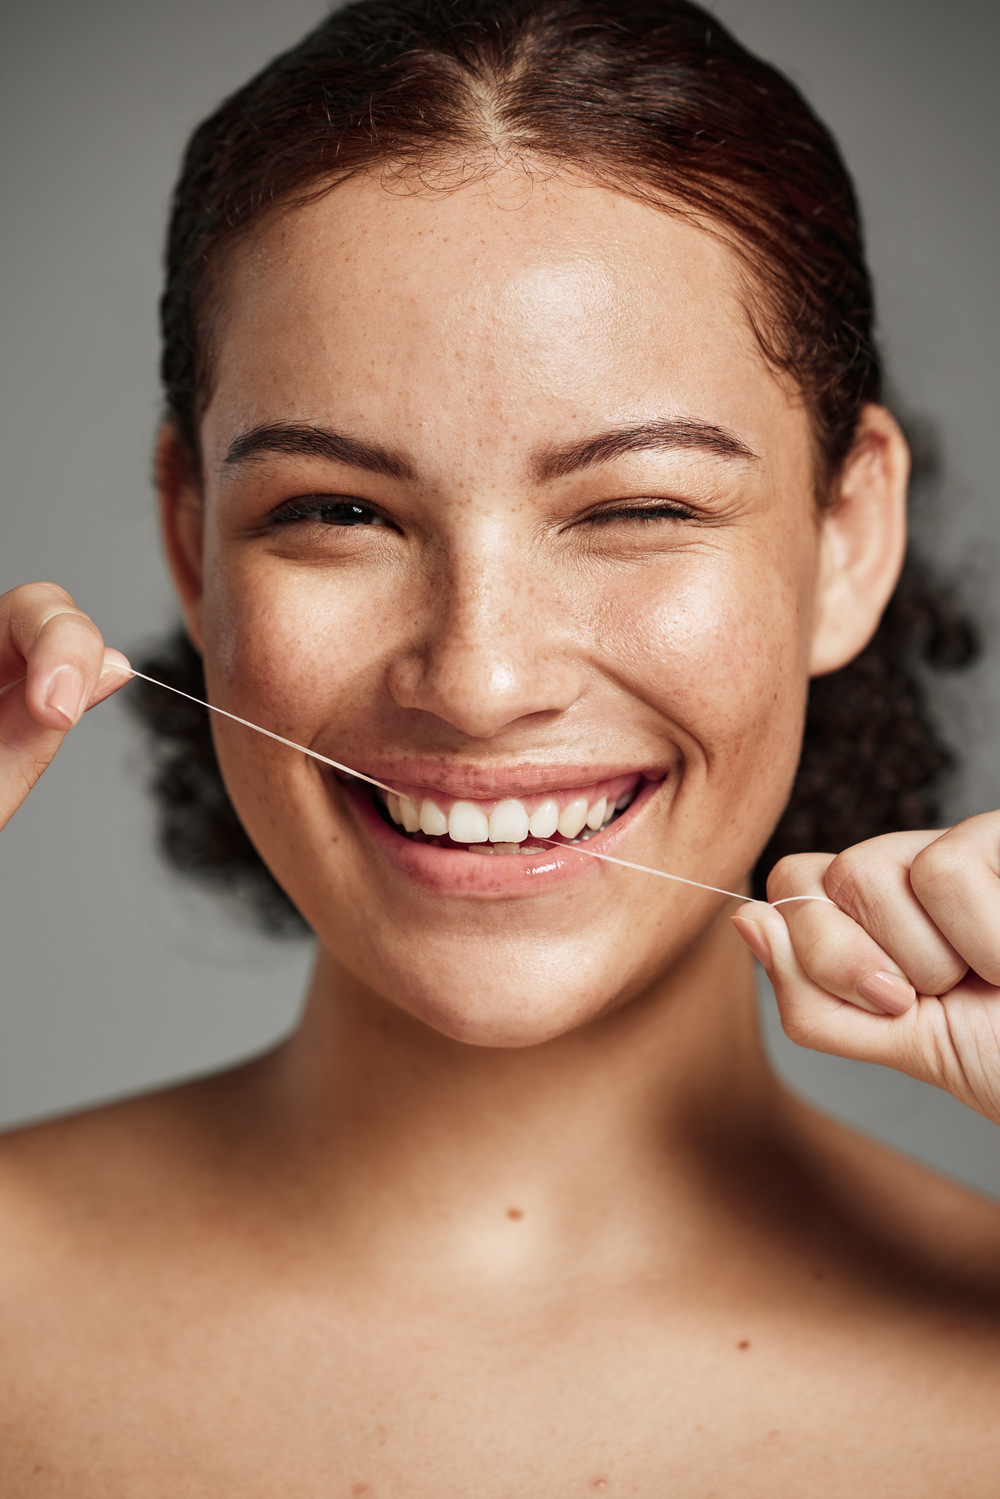 Teeth flossing, dental floss and portrait of woman with a smile in studio for oral hygiene, health .